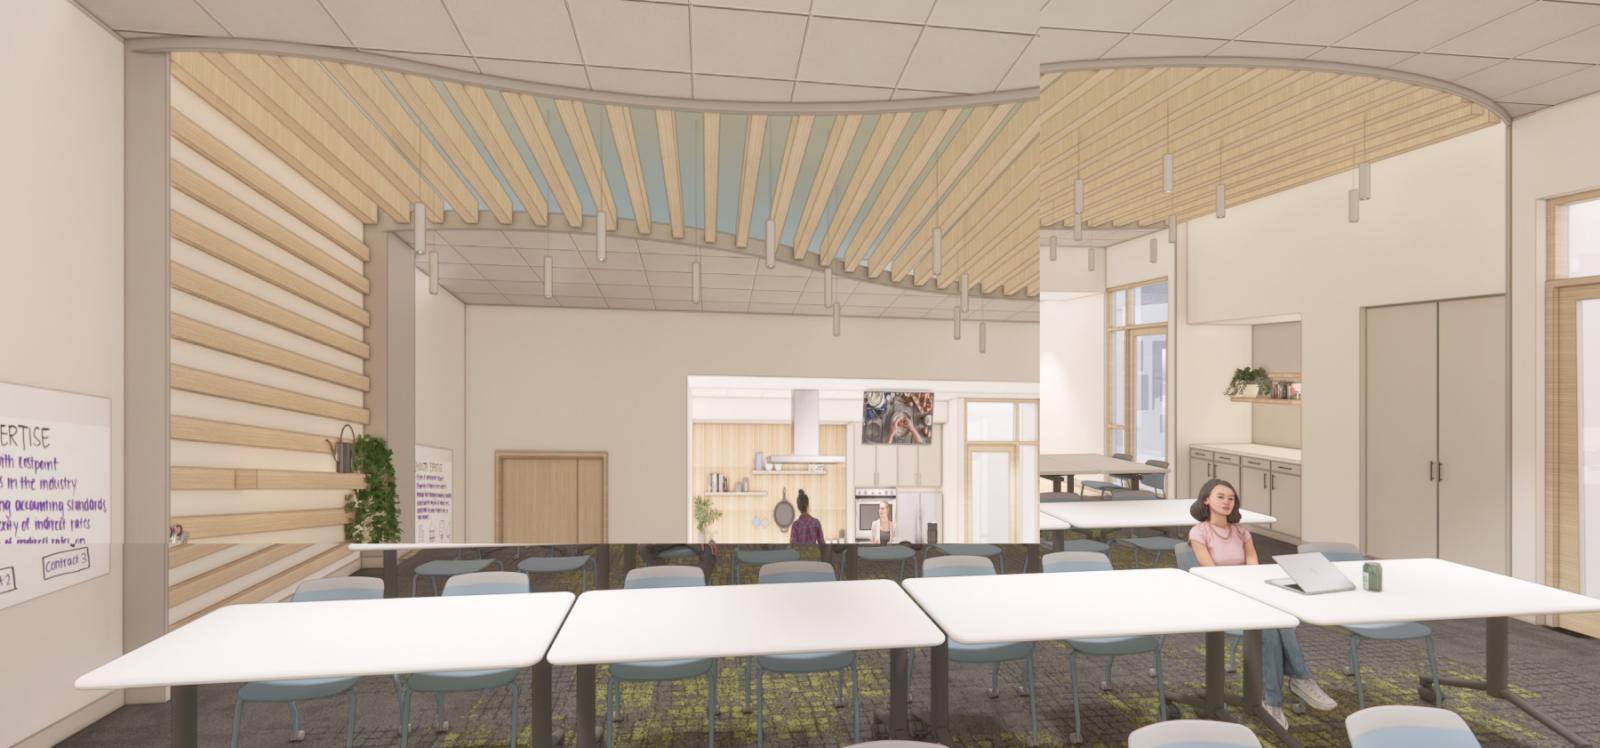 A drawing shows what the Pre-Health Commons will look like in Fox Commons, including a built-in kitchen amid the teaching spaces.